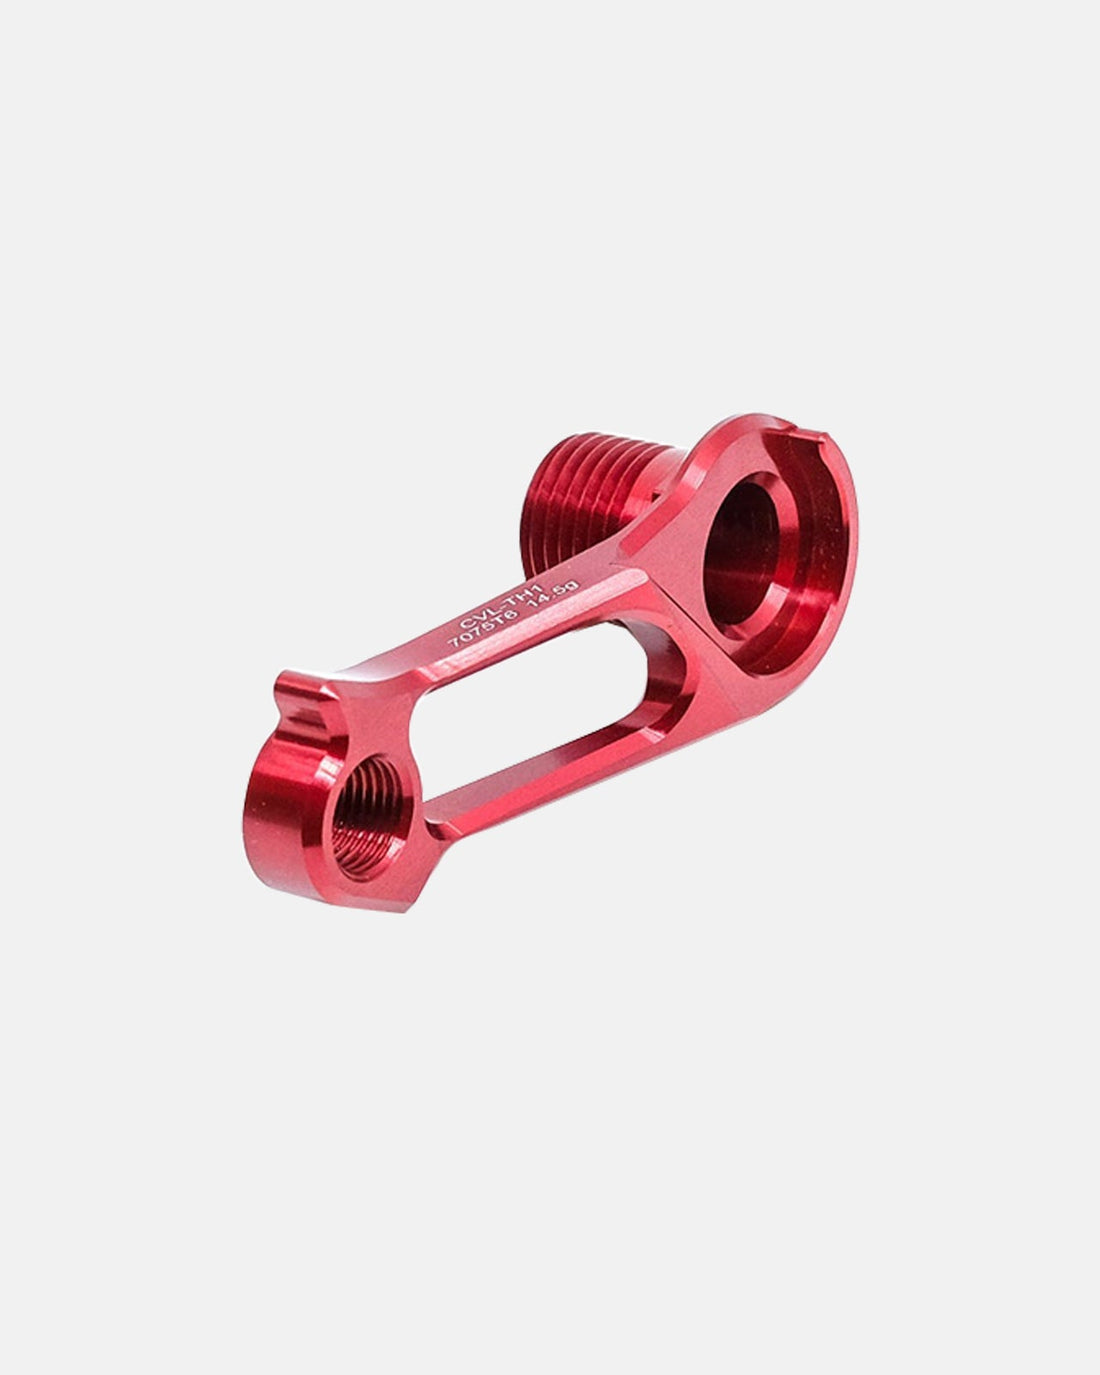 Sigeyi Cervelo Direct-Mount Disc Derailleur Hanger - Red - Sigeyi